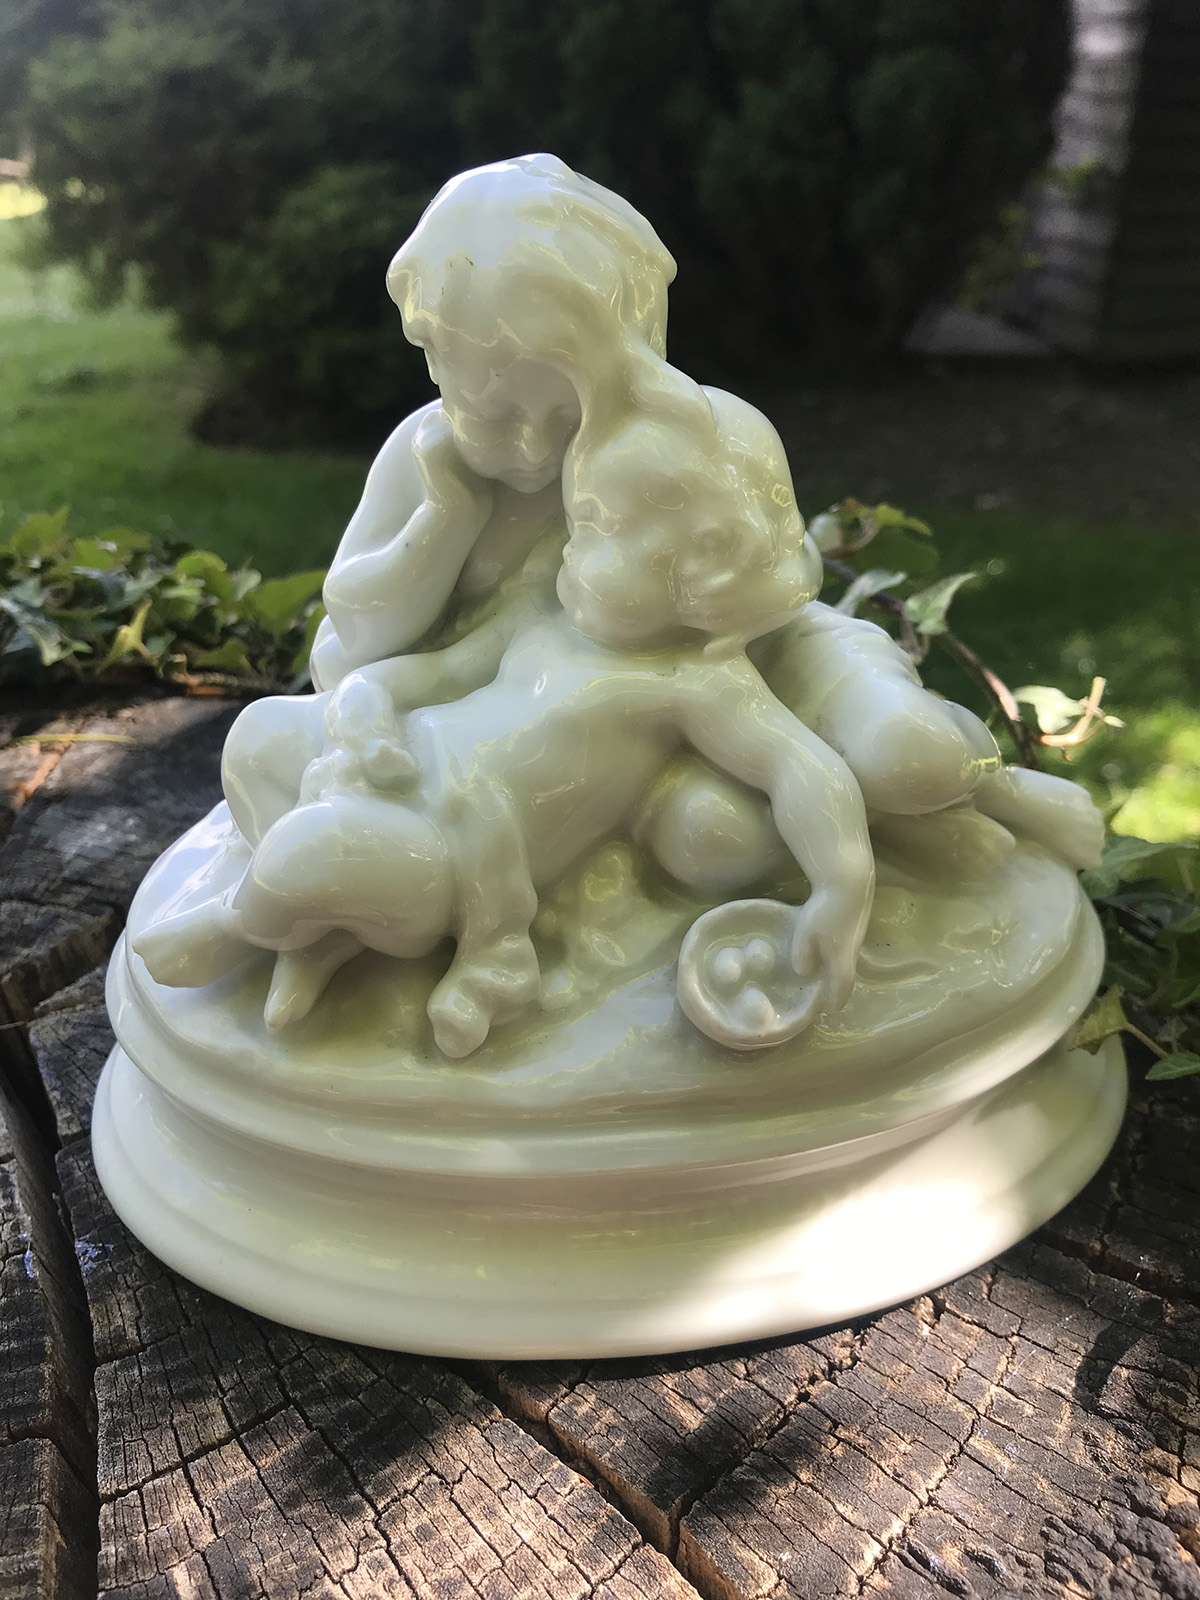 Early 19c Blanc de Chine Figurines of Babies